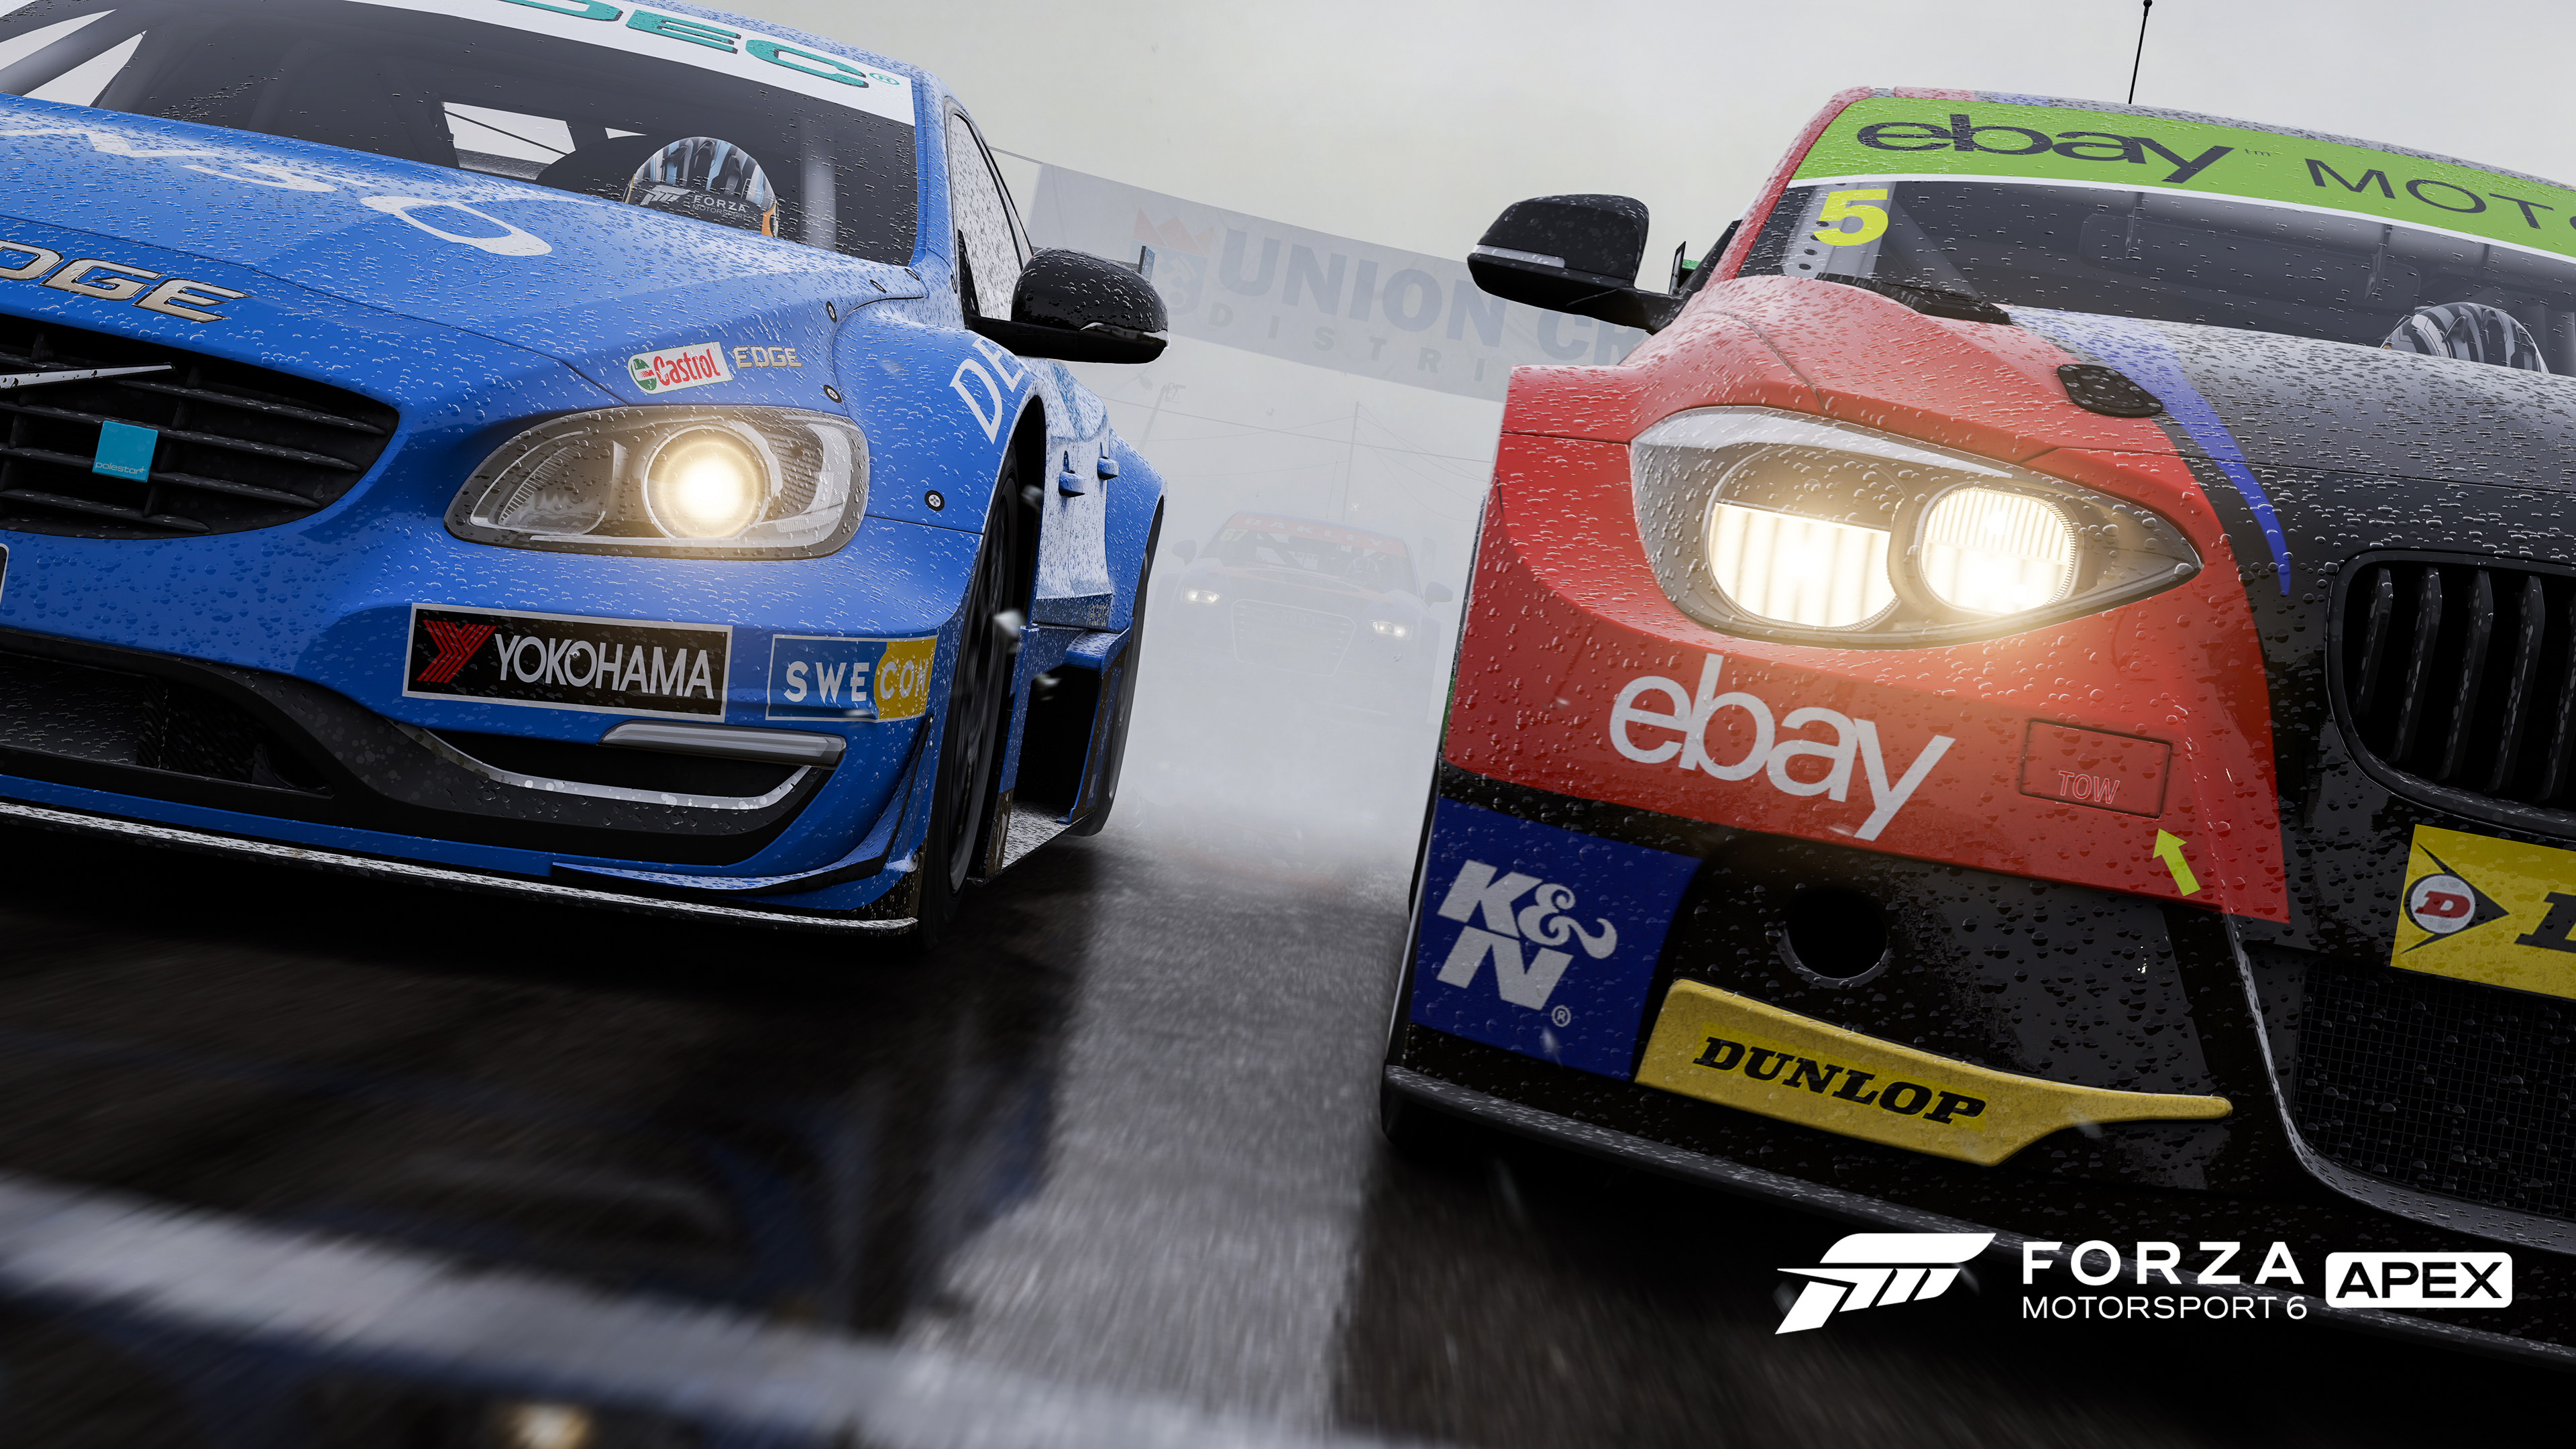 Video For The Forza Franchise Debuts on Windows 10 PCs This Spring